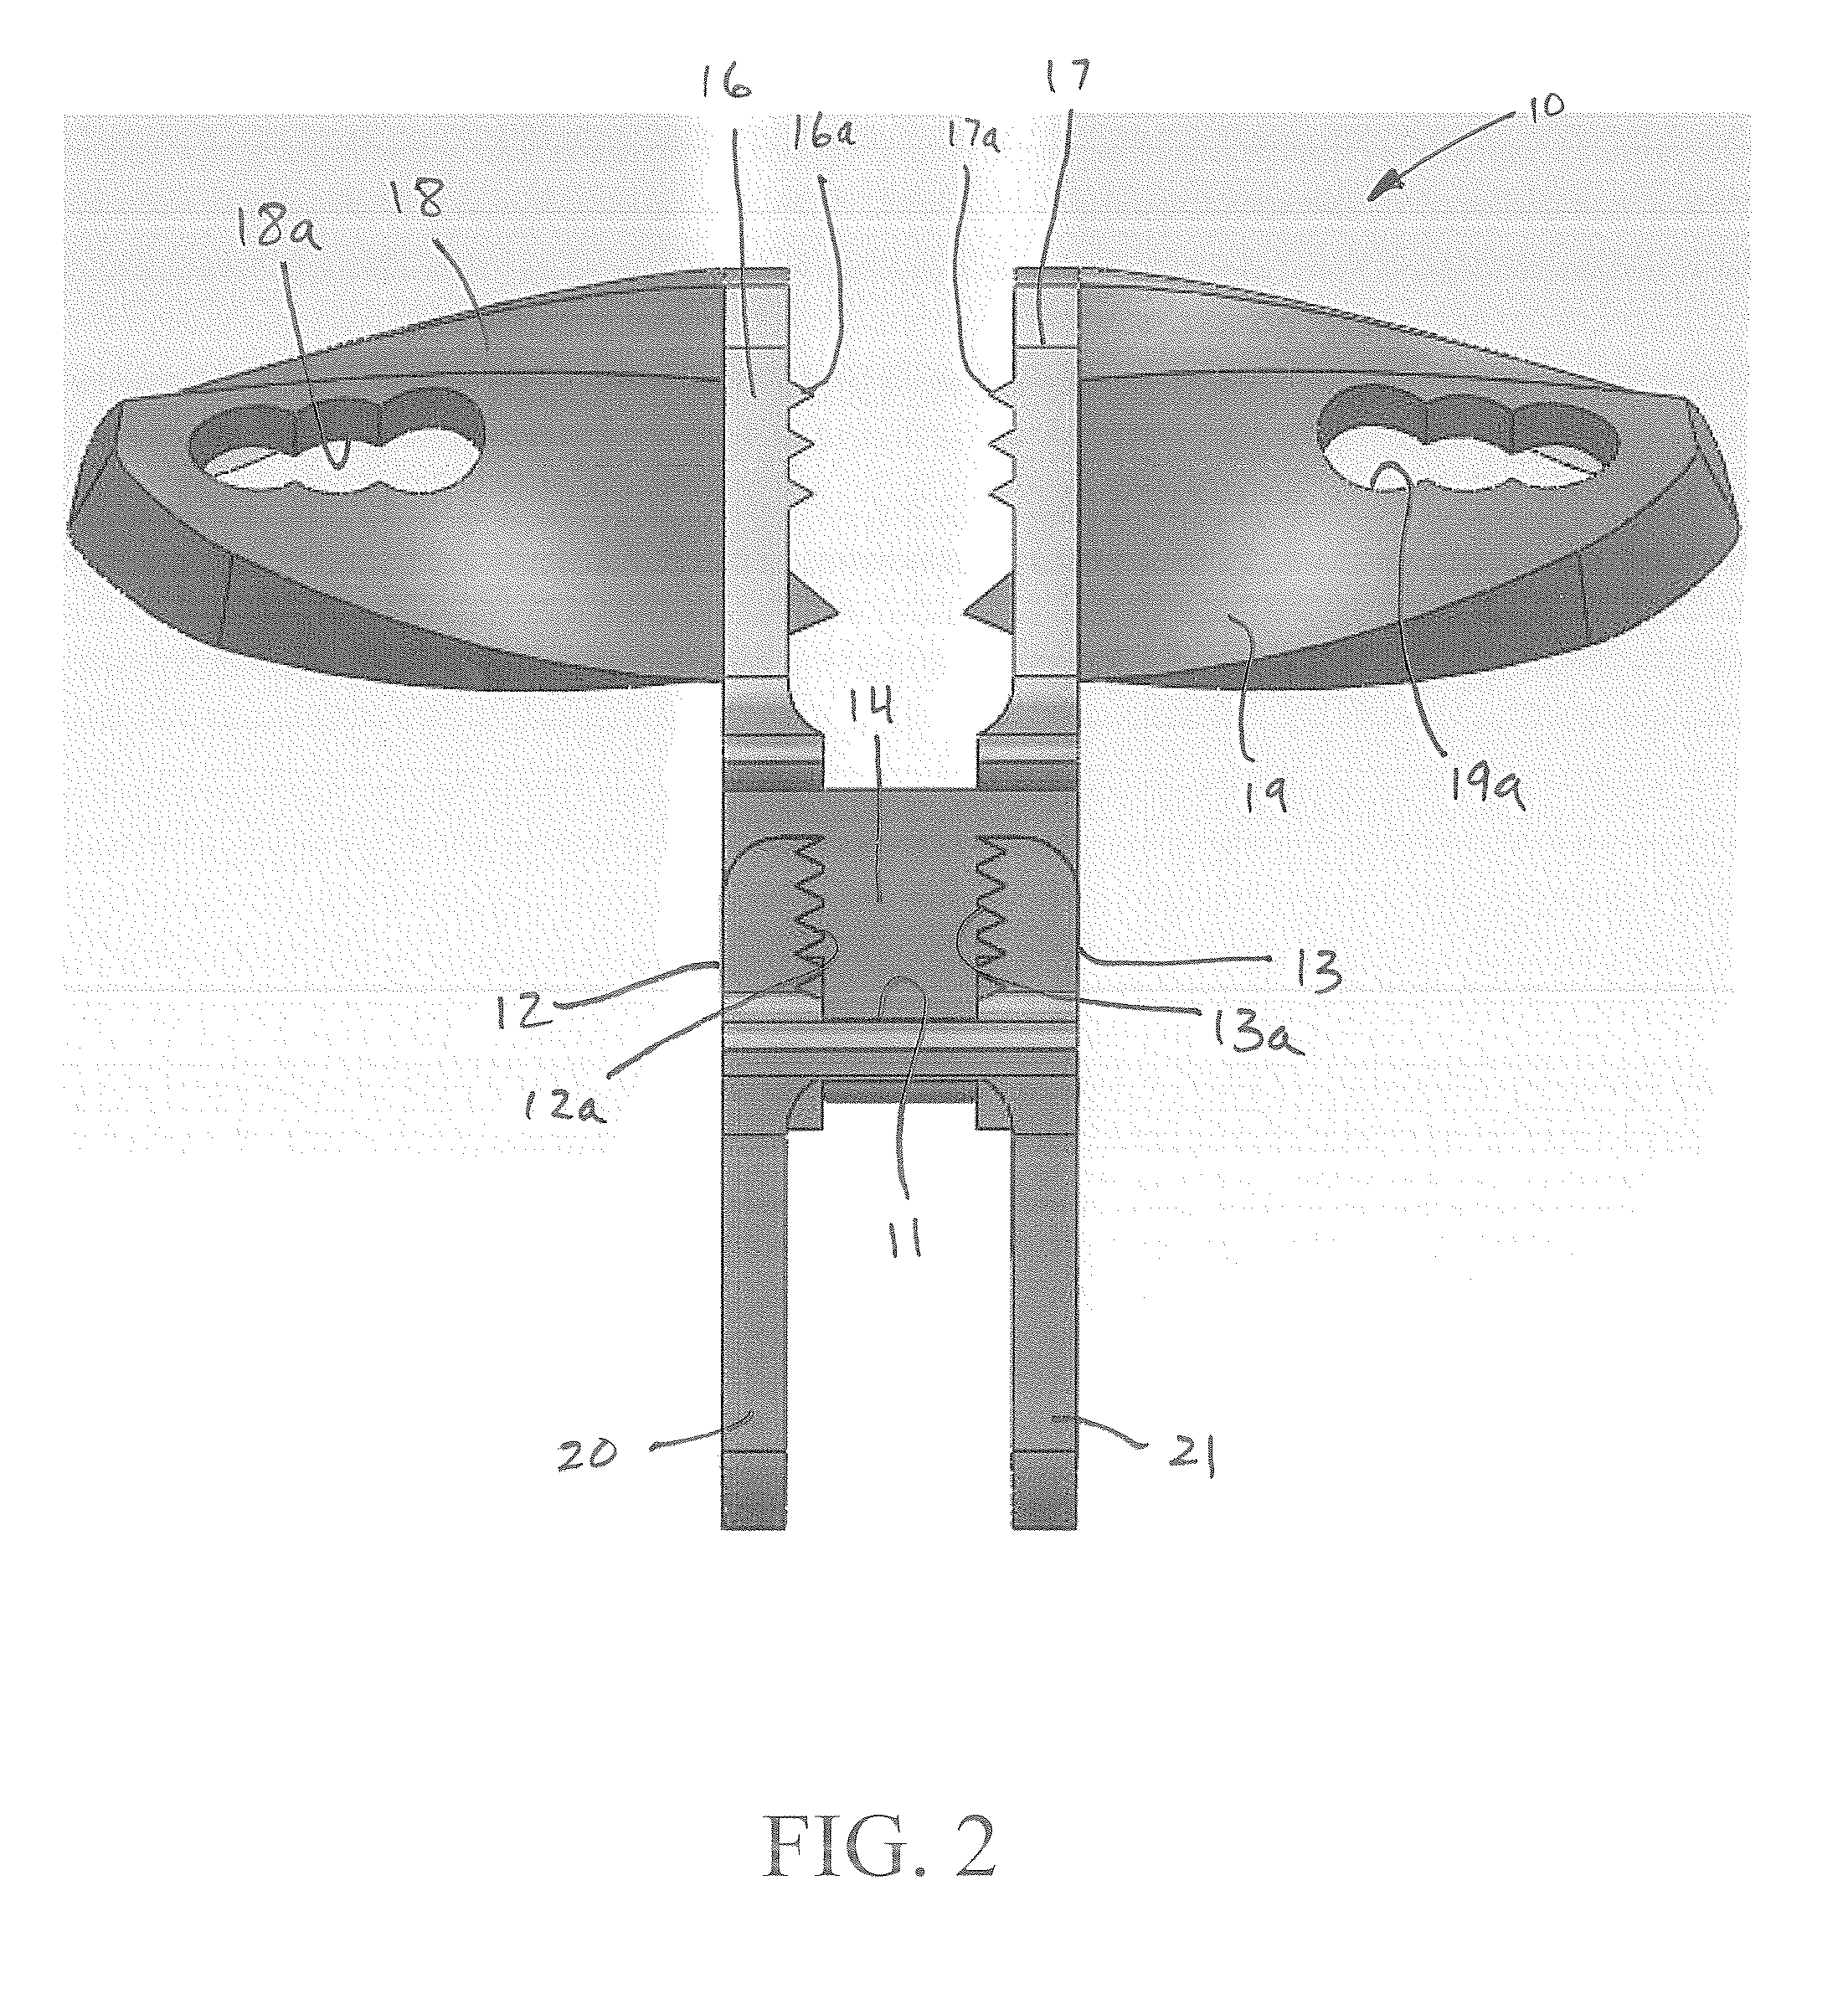 Hybrid Multifunctional Posterior Interspinous Fusion Device